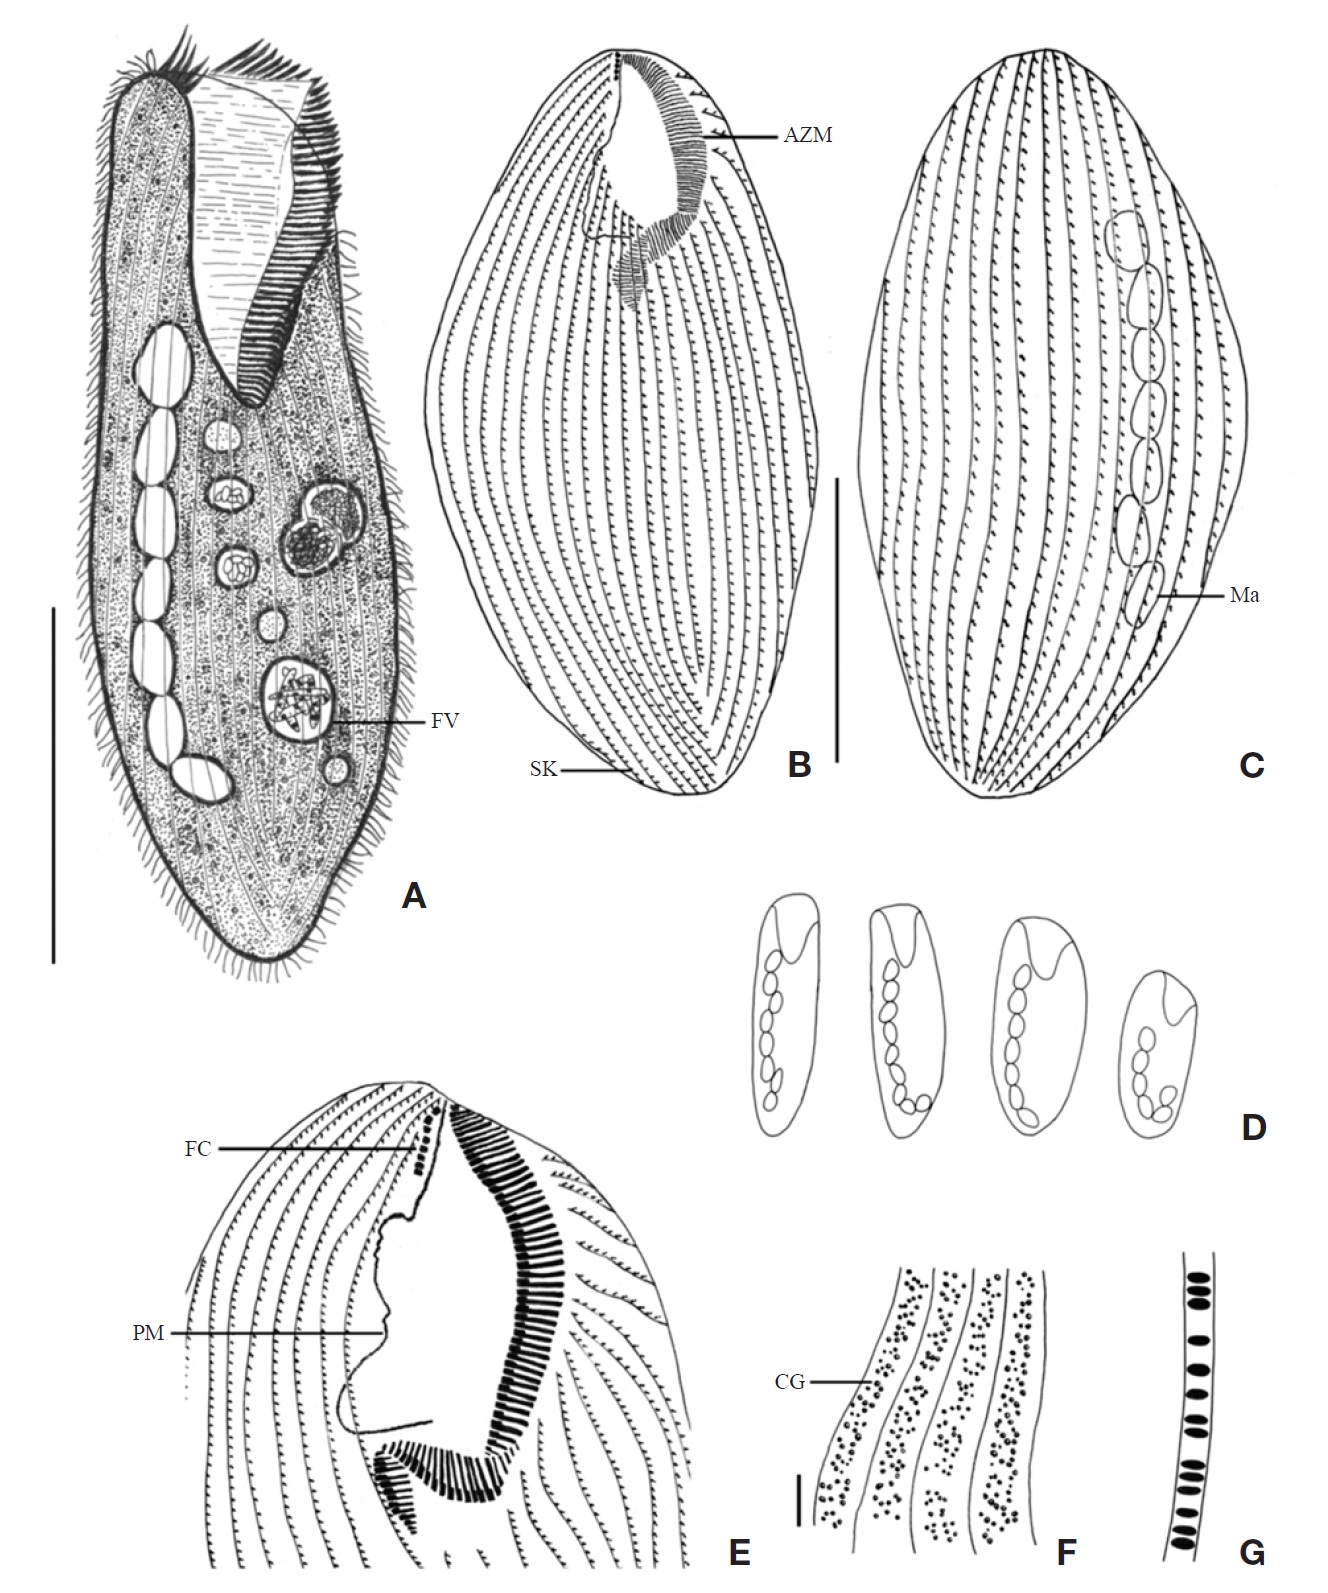 Morphology and infraciliature of Condylostoma curva from live specimens (A, D, F, G) and after protargol impregnation (B, C, E). A, Ventral view of a typical individual; B, Ventral view of impregnated specimen; C, Dorsal view of impregnated specimen; D, Varied body shapes and macronuclear patterns; E, Ventral view of buccal field; F, Pattern of cortical granules; G, Lateral view of cortical granules. AZM, adoral zone of membranelles; CG, cortical granule; FC, frontal cirrus; FV, food vacuole; Ma, macronucleus; PM, paroral membrane; SK, somatic kineties. Scale bars: A, C=100 μm, F=5 μm.